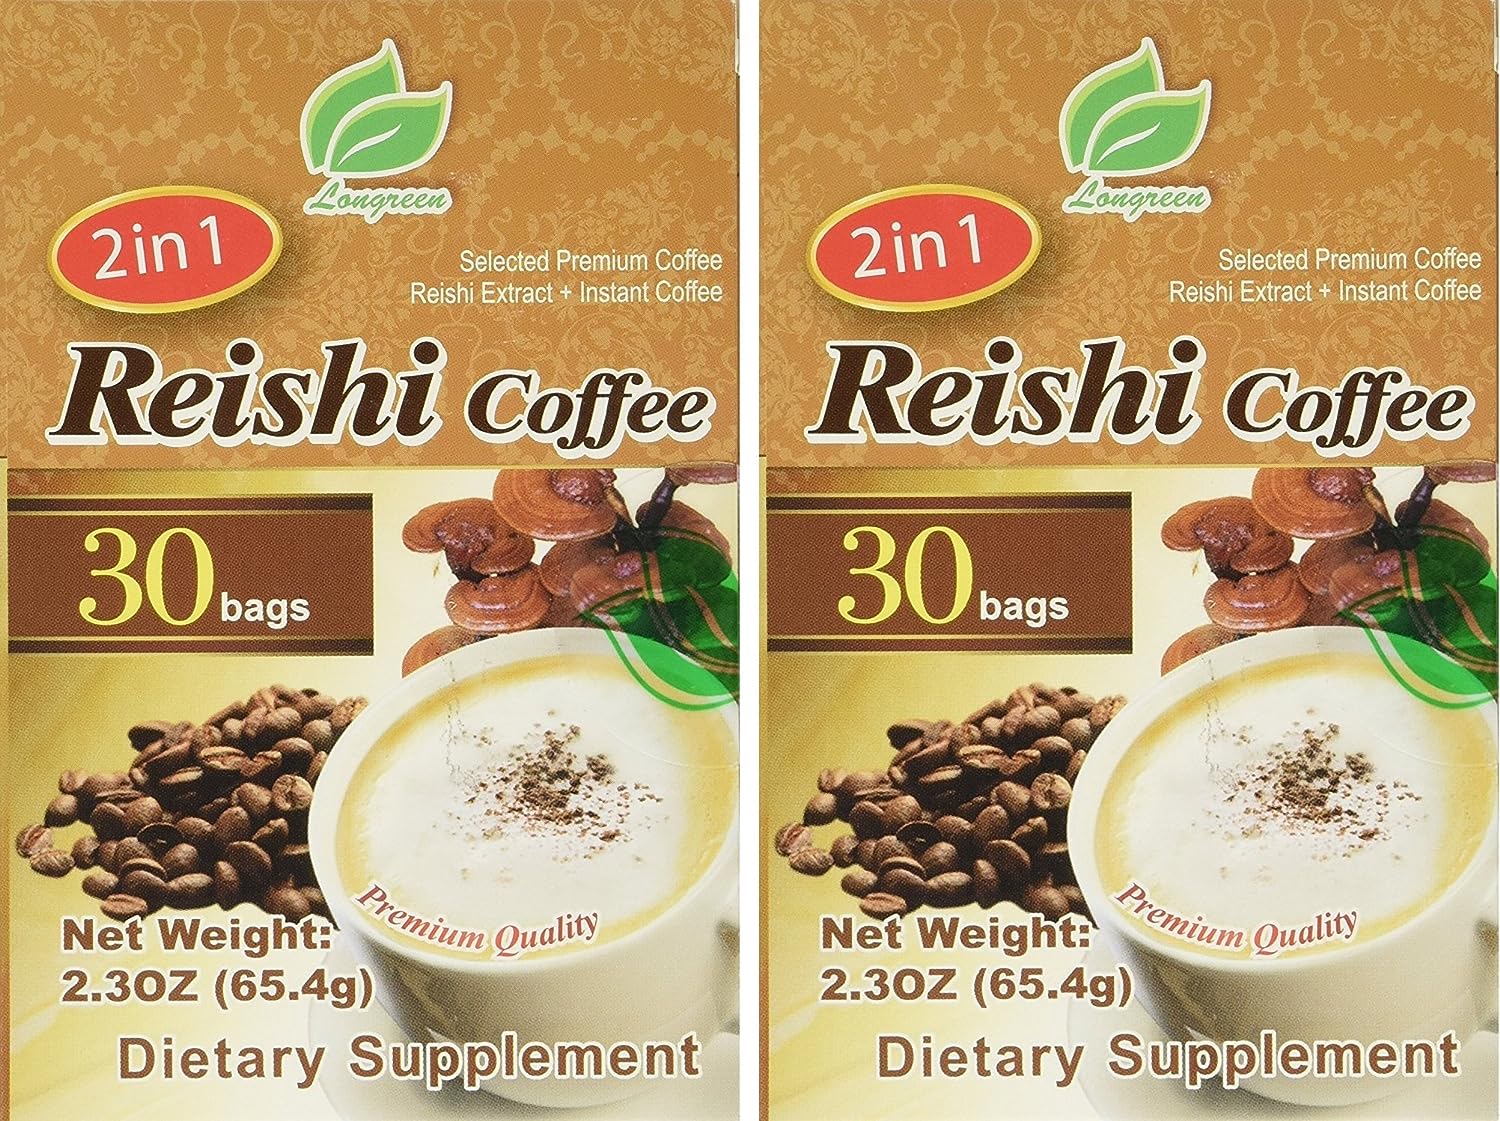 Reishi Coffee 2 in 1 - Selected Premium Coffee - Reishi Extract and Instant Coffee - 30 Bags Per Box (Pack of 2)